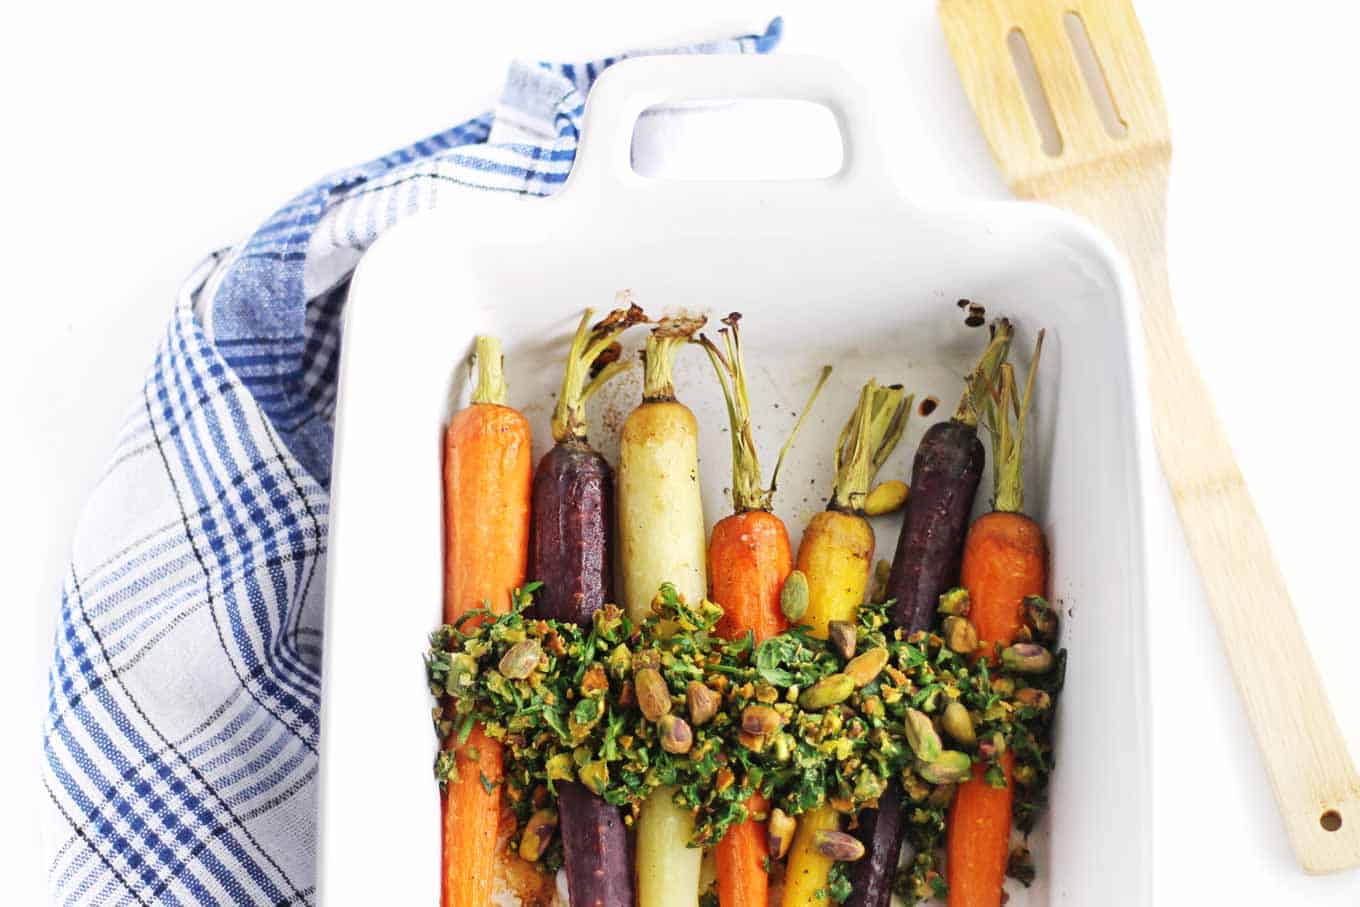 A photo of oven roasted carrots with herb relish in a white roasting pan with a blue and white plaid towel and wooden spatula.